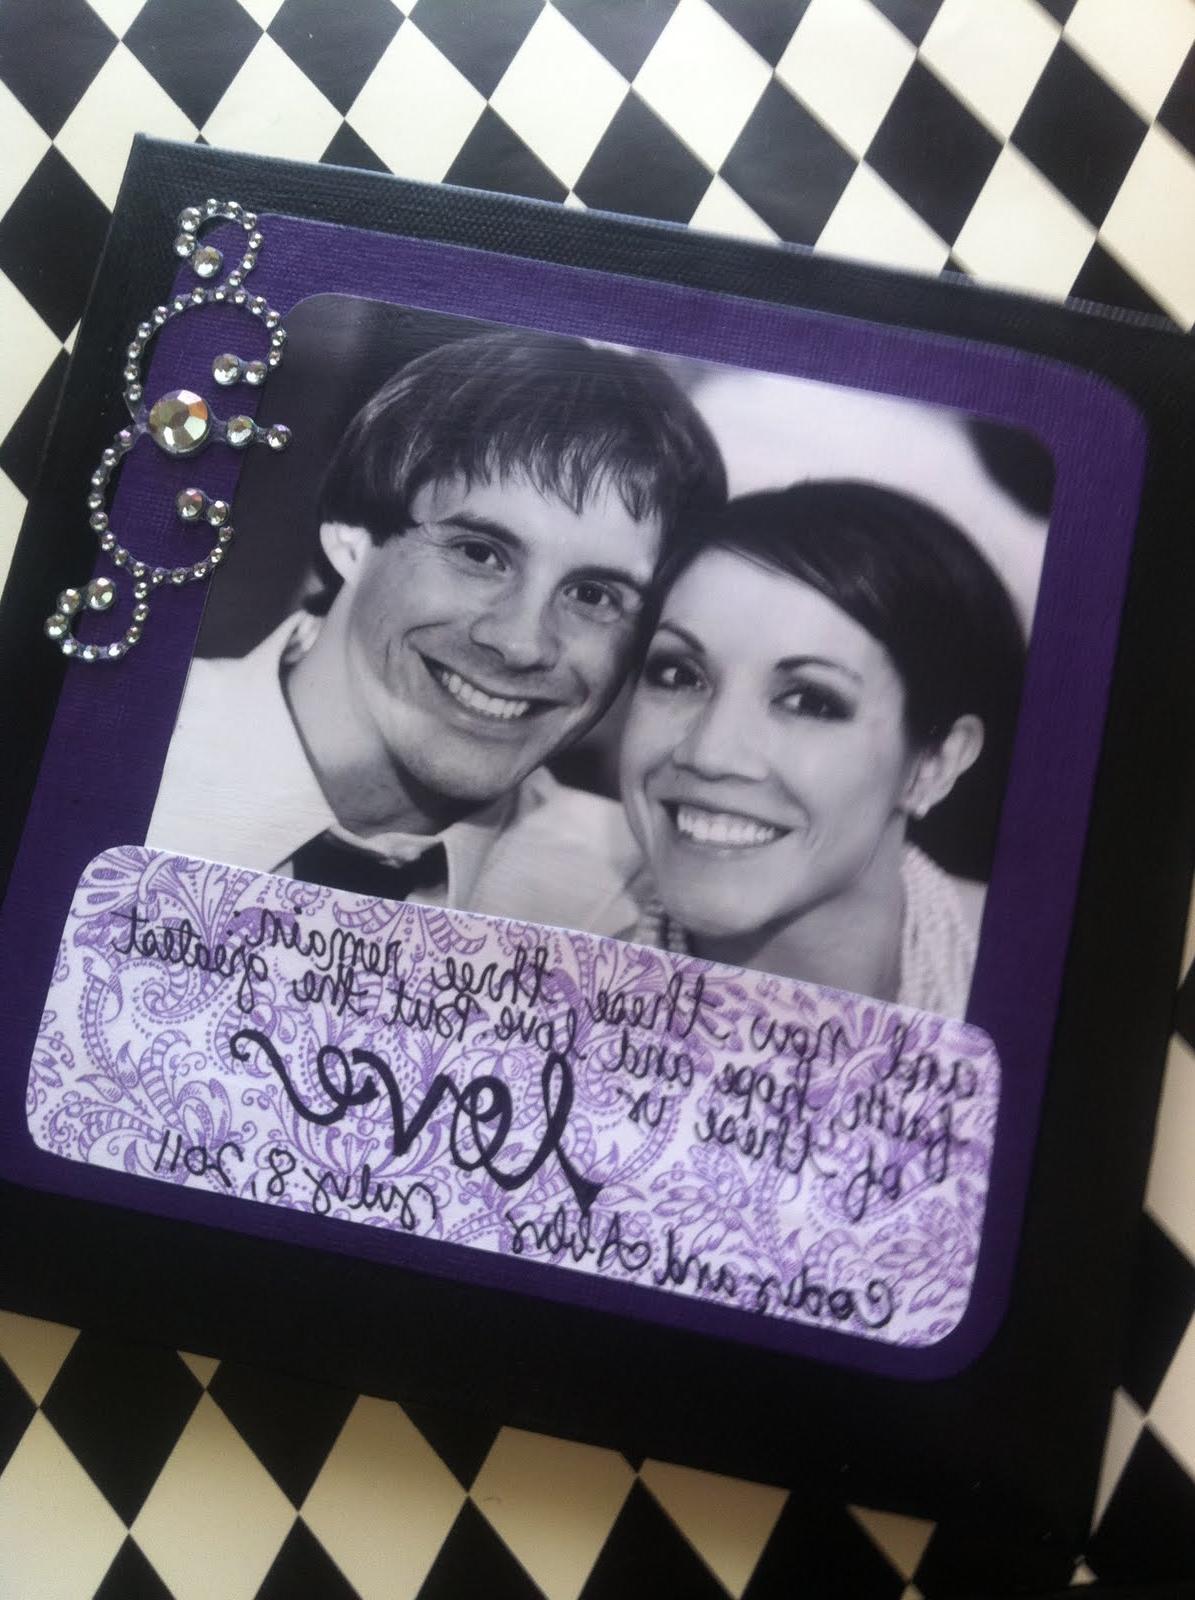 A 6x6 canvas with a purple